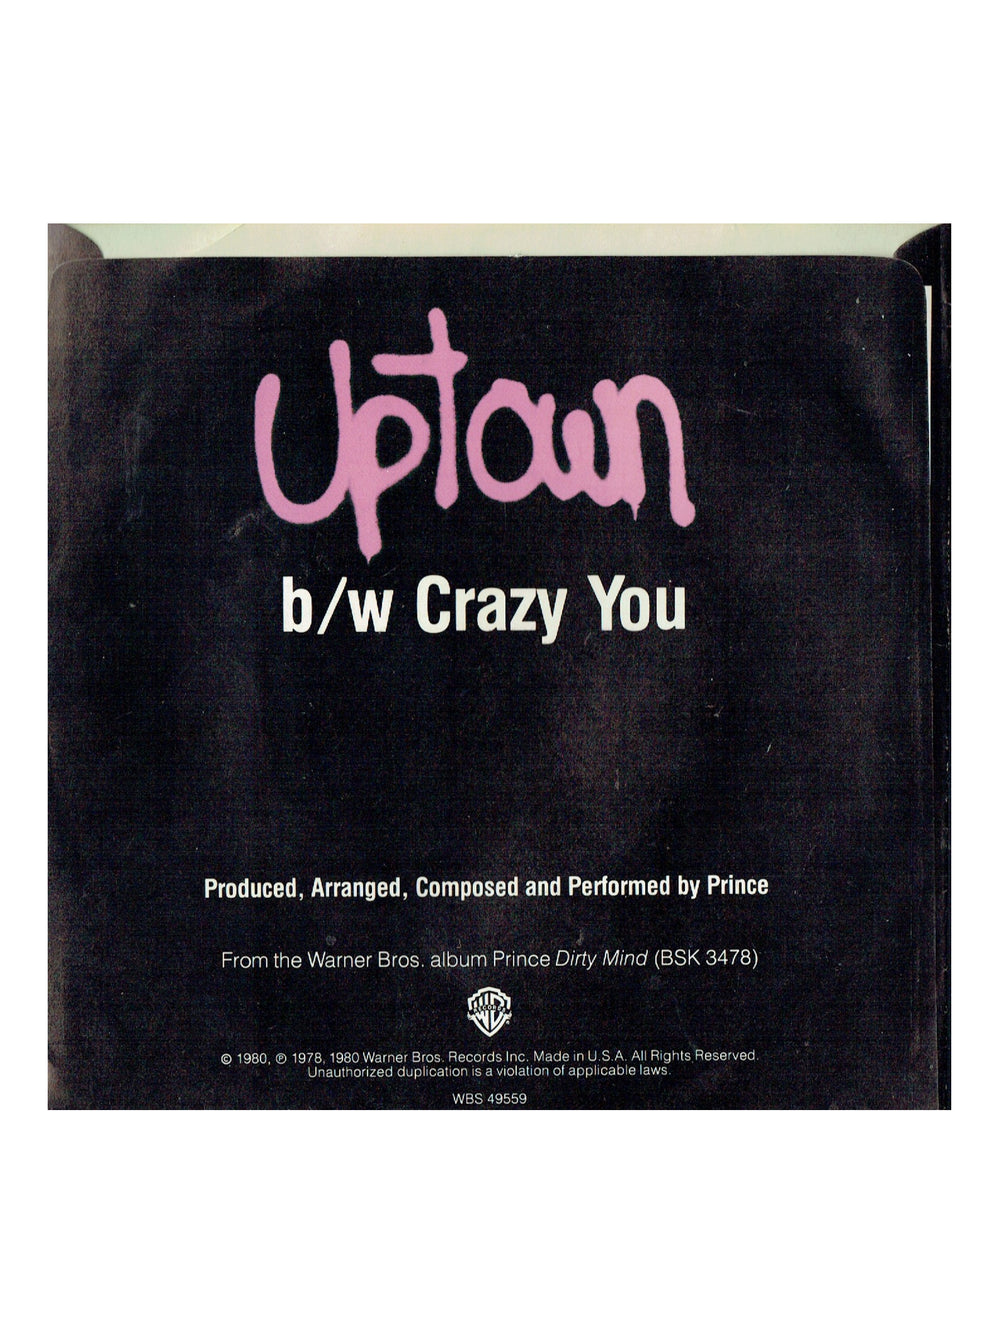 Prince – Uptown / Crazy You Original 7 Inch Vinyl Single USA Release PINK TEXT